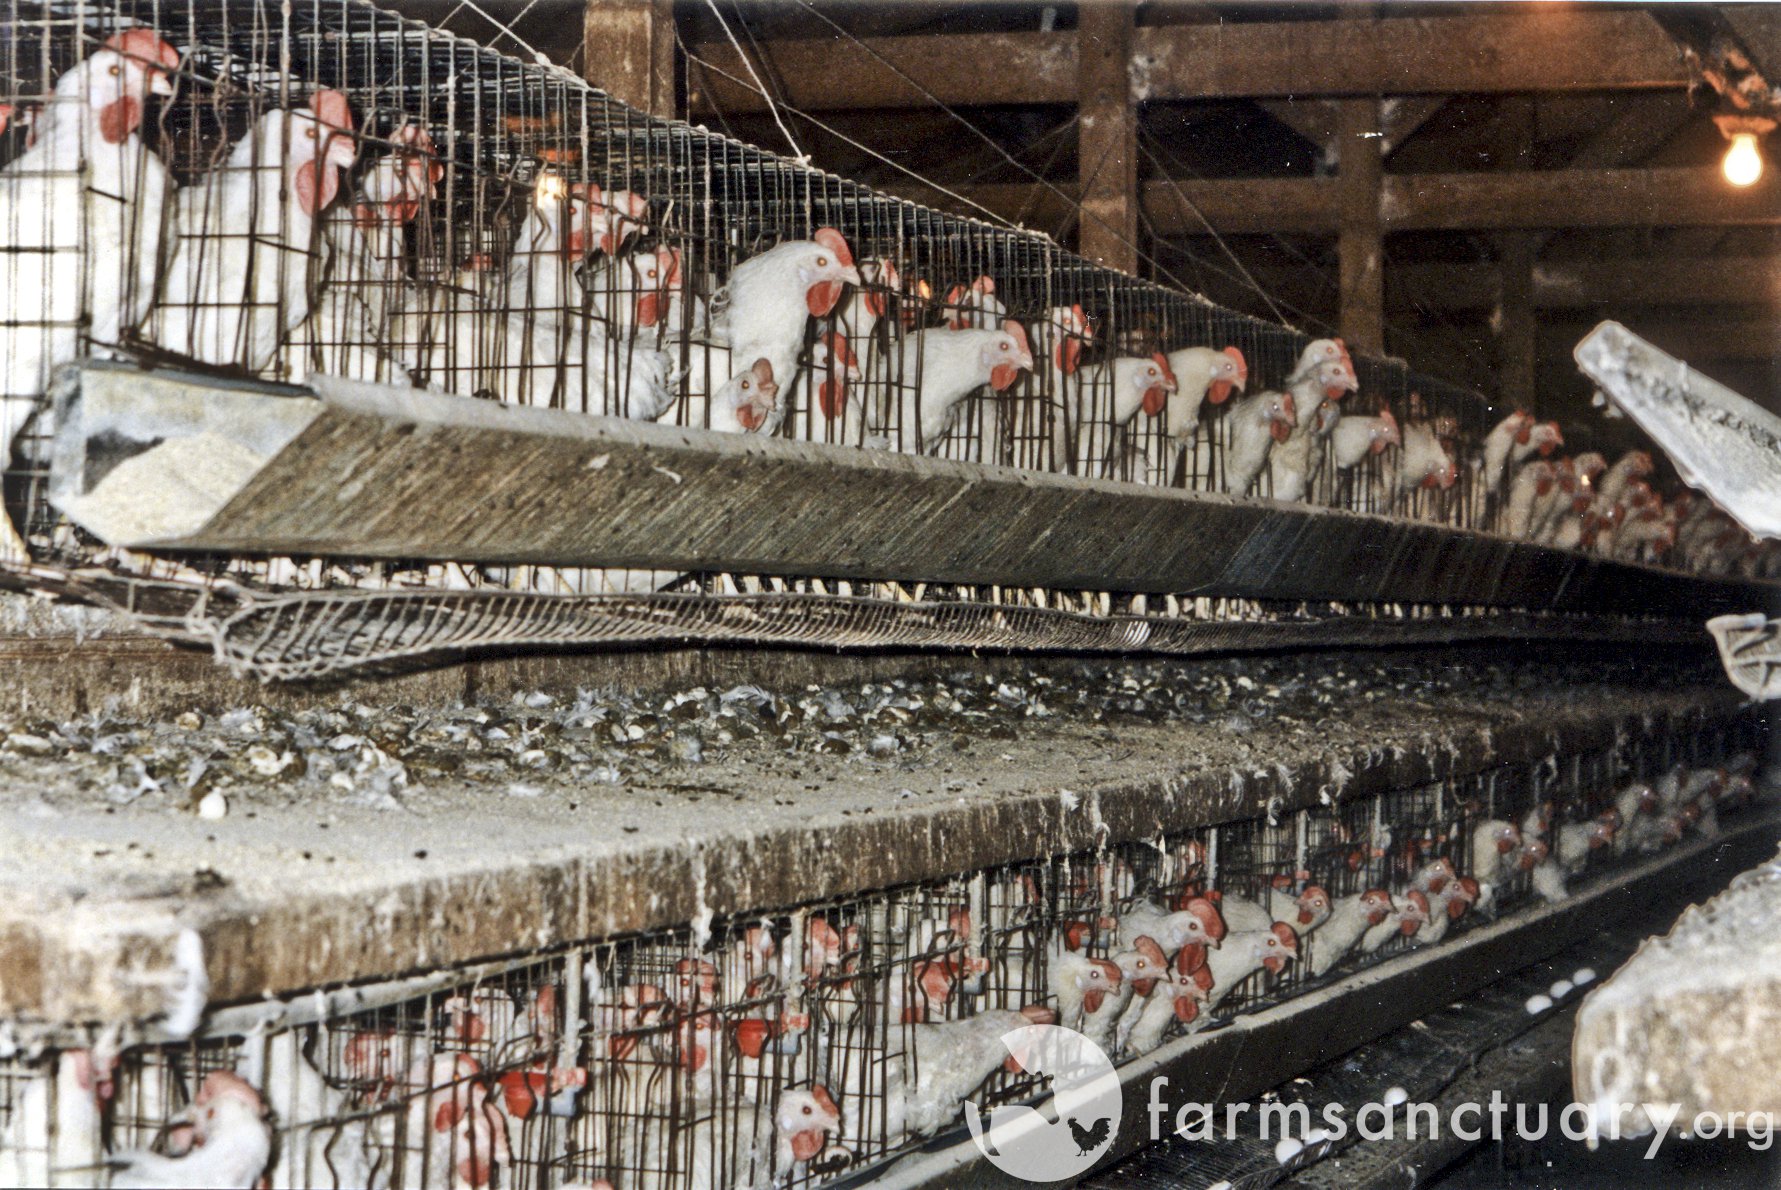 Chickens kept in battery cages